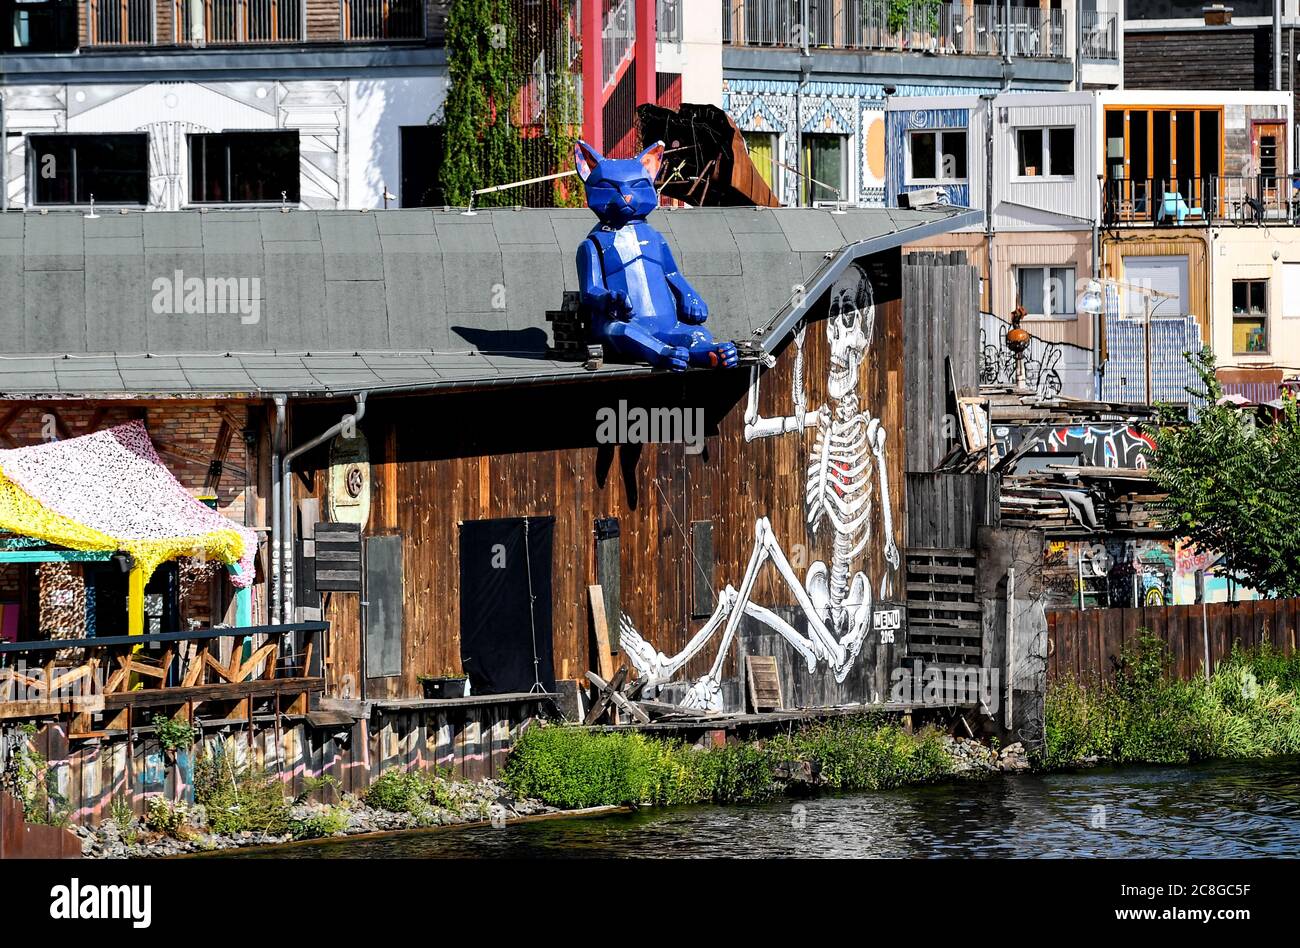 https://c8.alamy.com/comp/2C8GC5F/21-july-2020-berlin-the-techno-club-kater-blau-on-the-banks-of-the-spree-outside-the-usual-opening-hours-other-cultural-events-such-as-theatre-performances-readings-or-panel-discussions-take-place-on-the-premises-photo-britta-pedersendpa-zentralbildzb-2C8GC5F.jpg